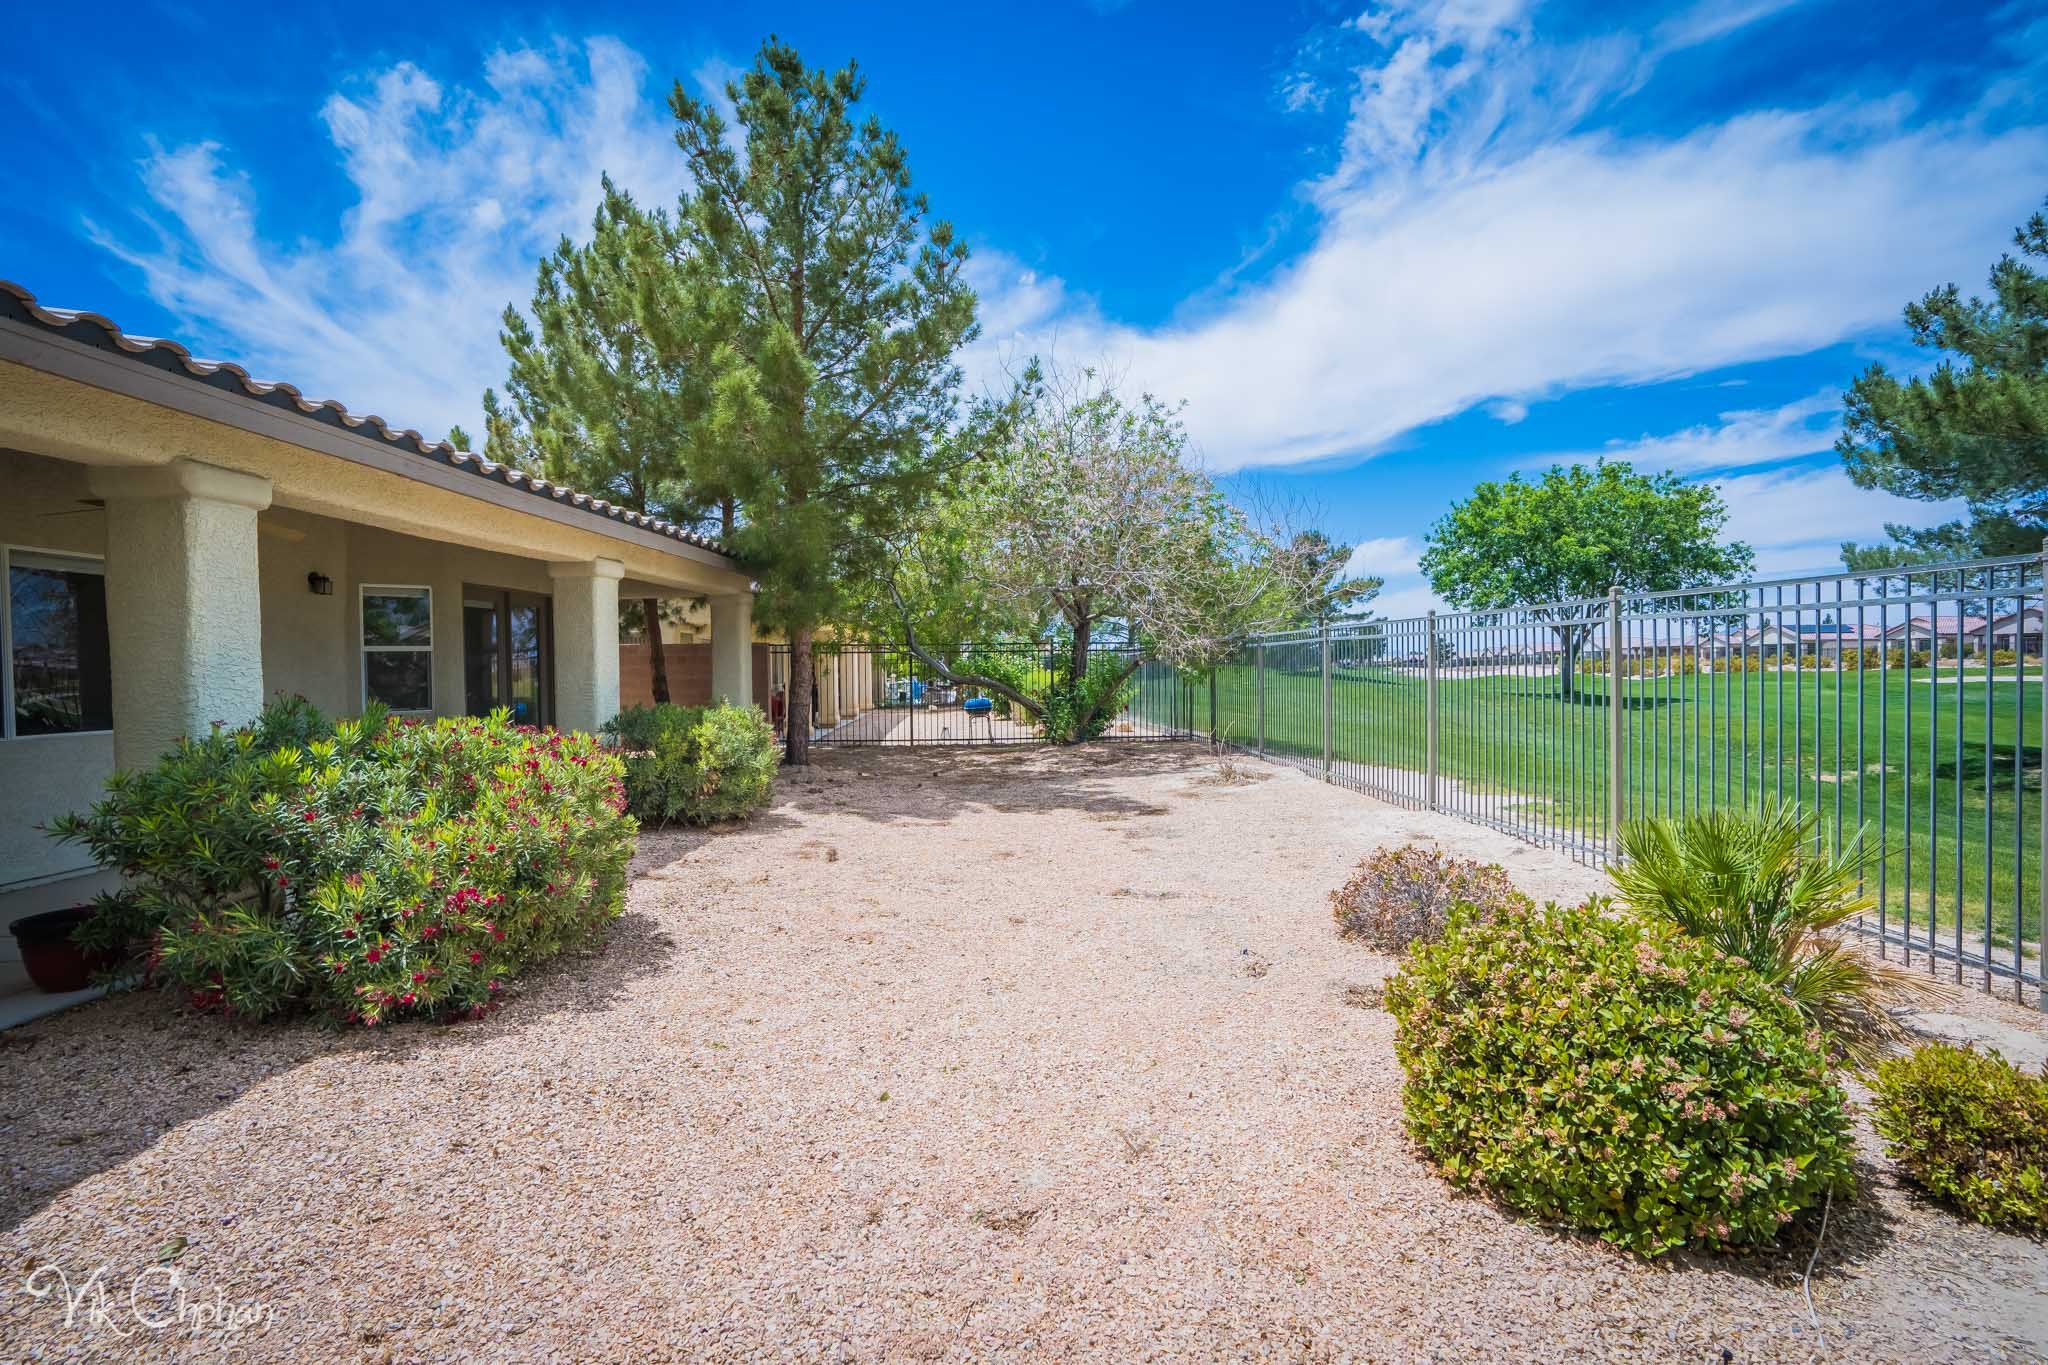 2022-05-15-5378-E-Cansano-St-Pahrump-Real-Estate-Photography-Virtual-Tour-Drone-Photography-Vik-Chohan-Photography-Photo-Booth-Social-Media-VCP-105.jpg